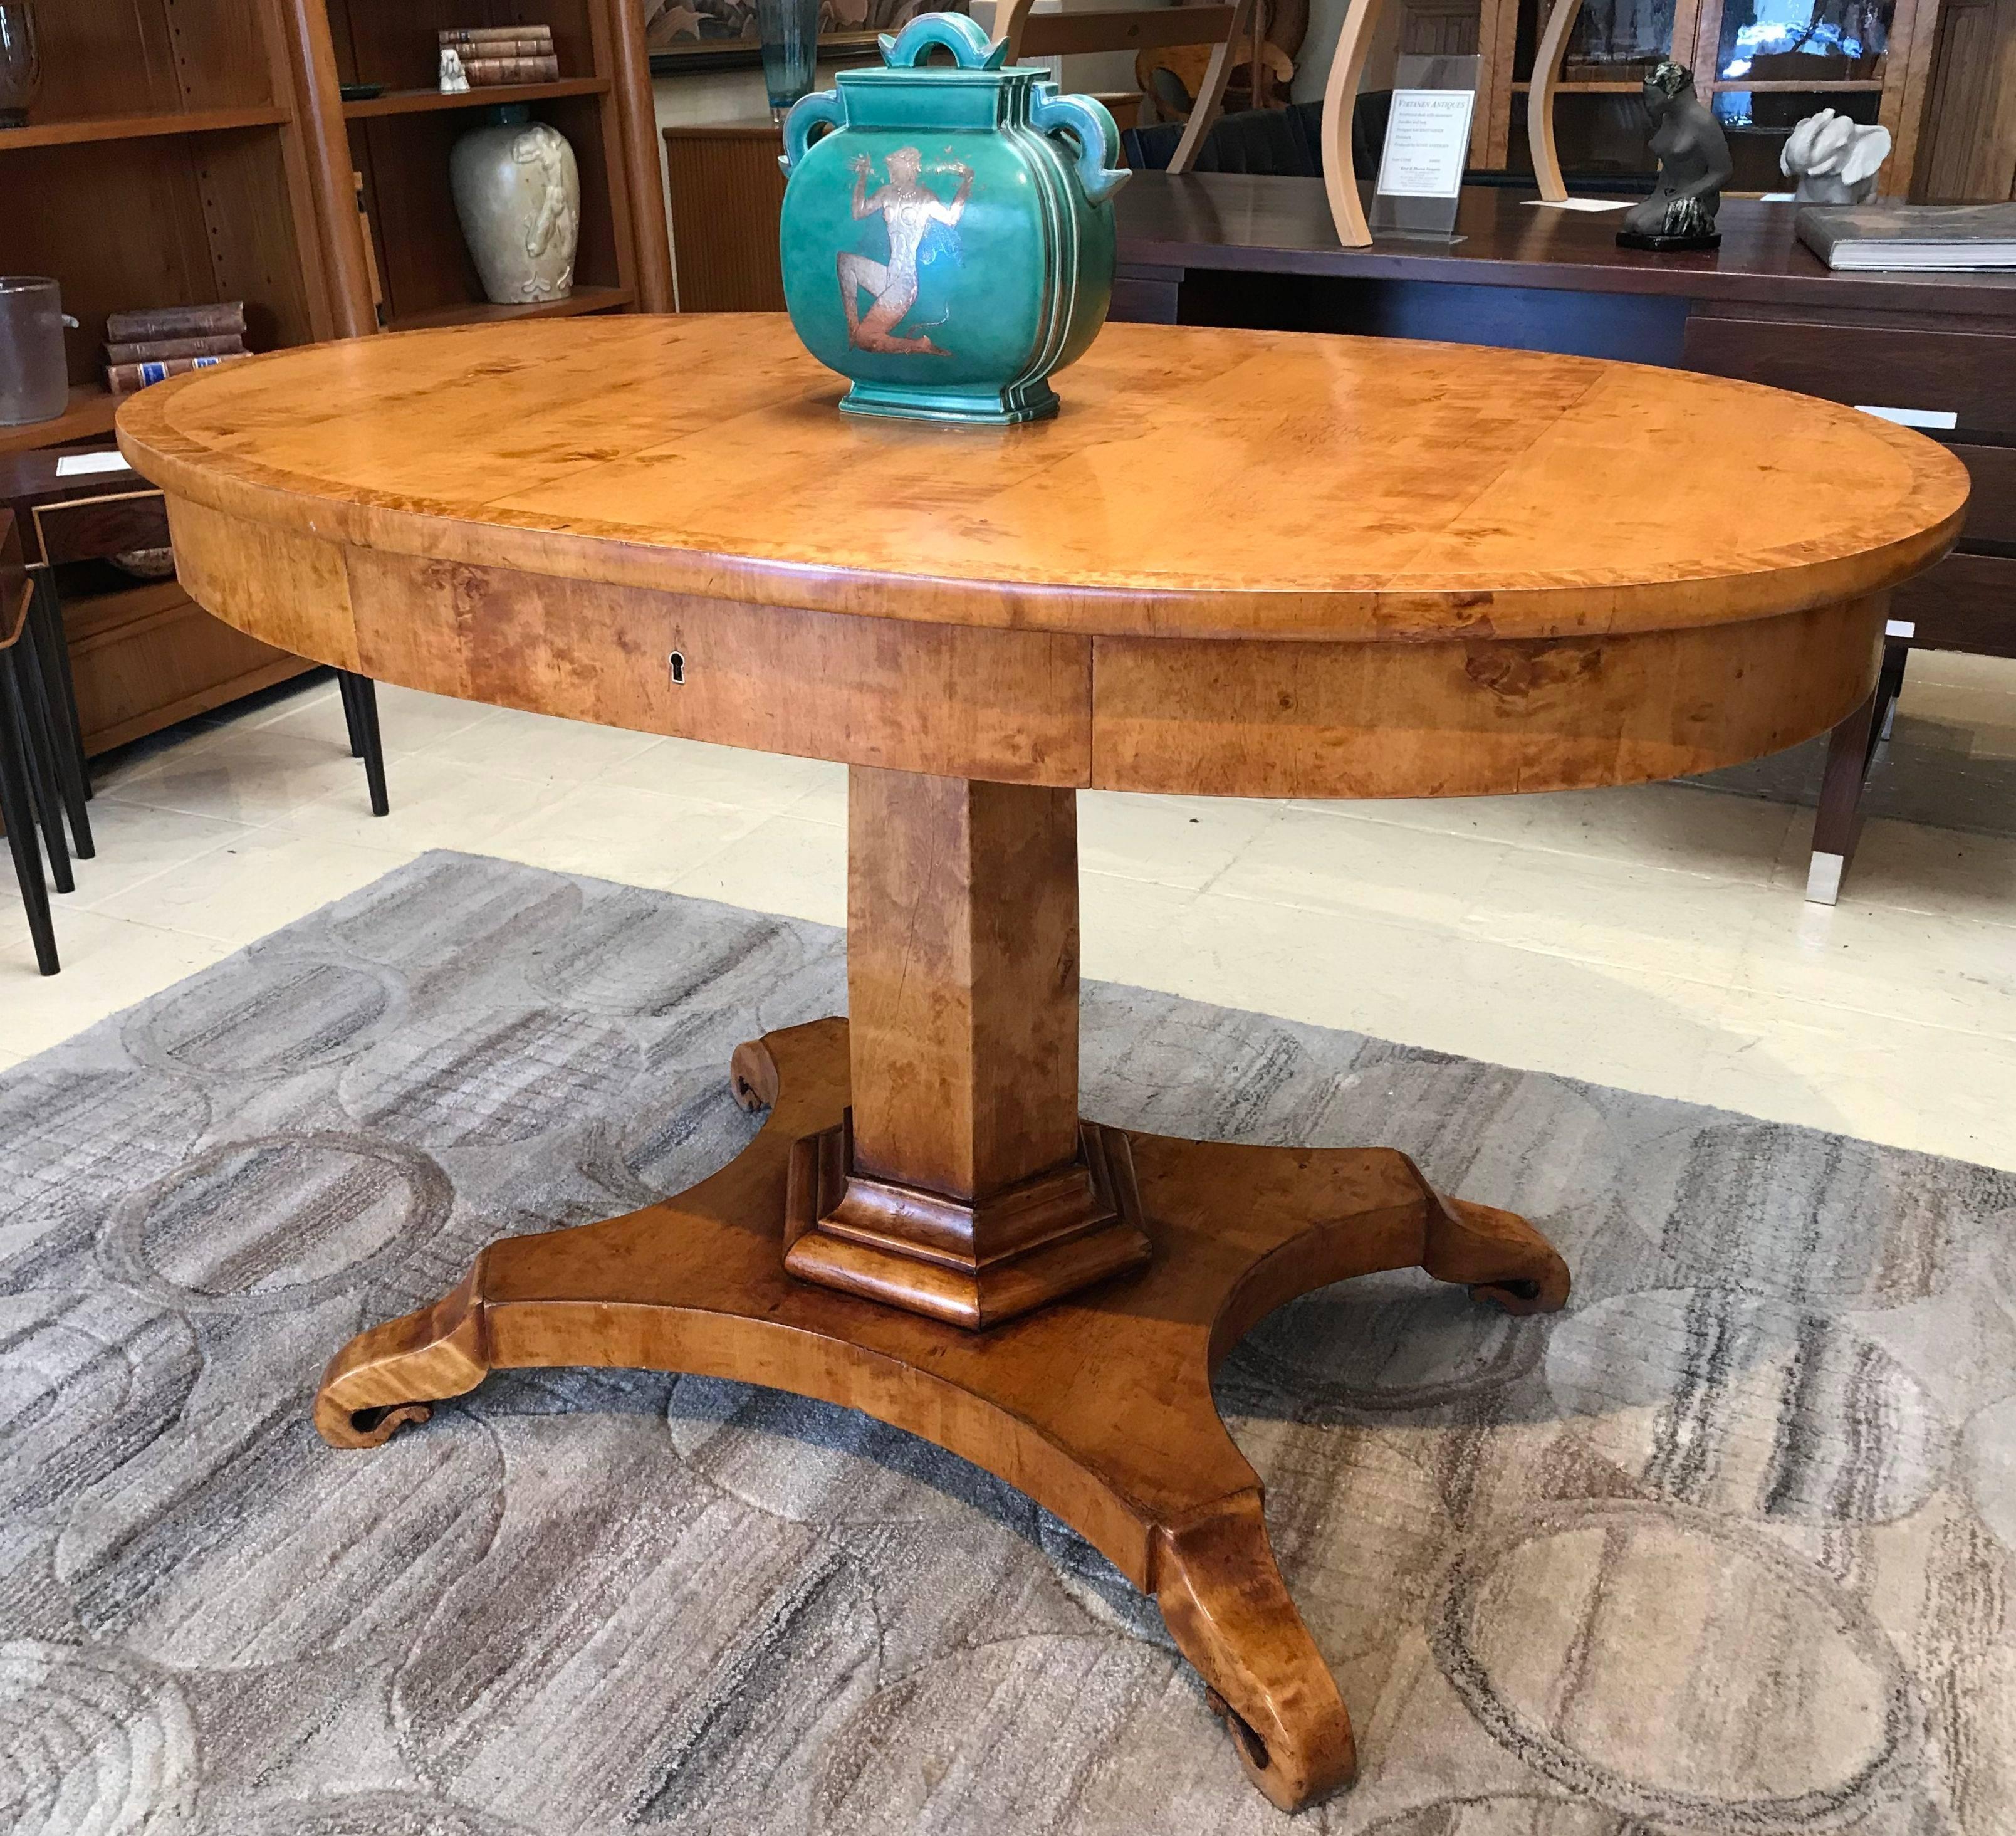 Swedish Biedermeier flame birch centre table with Karelian birch banding to the top. Central curved drawer. The base rests on shaped hand-carved scrolled feet. The birch has a lovely mellow color. This versatile table could be used as a breakfast